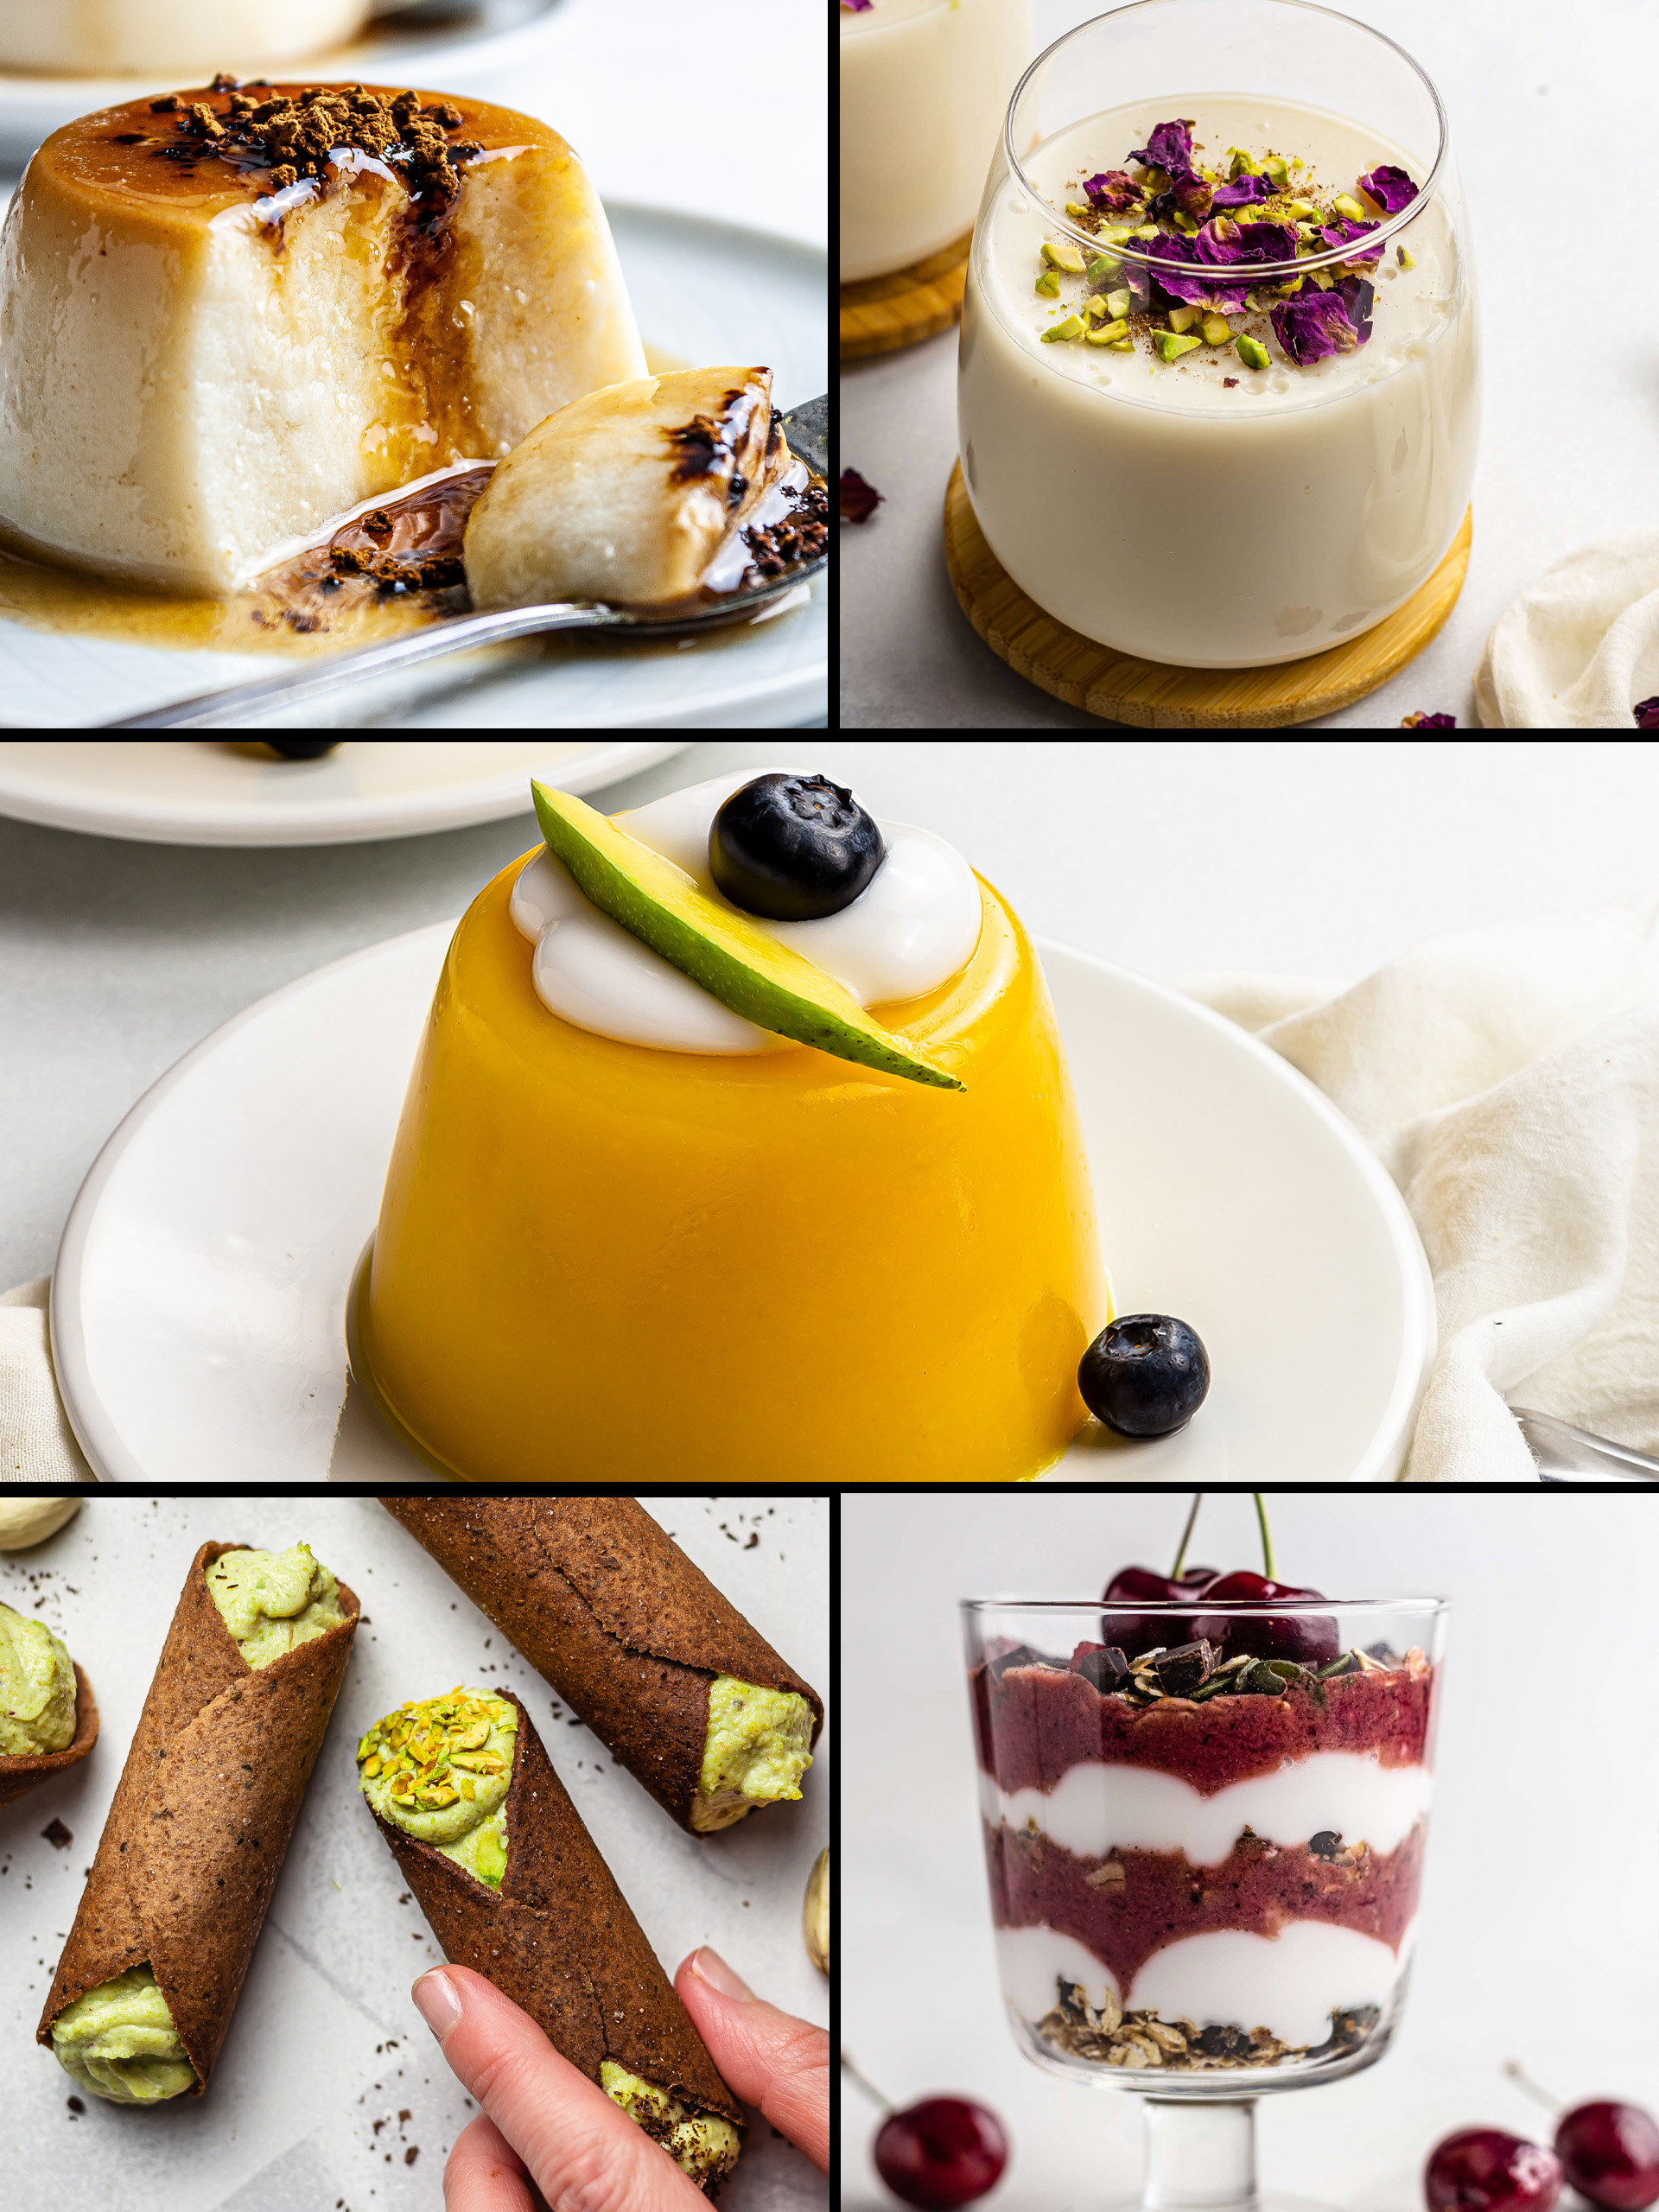 7 Dinner Party Desserts to Impress Your Guests